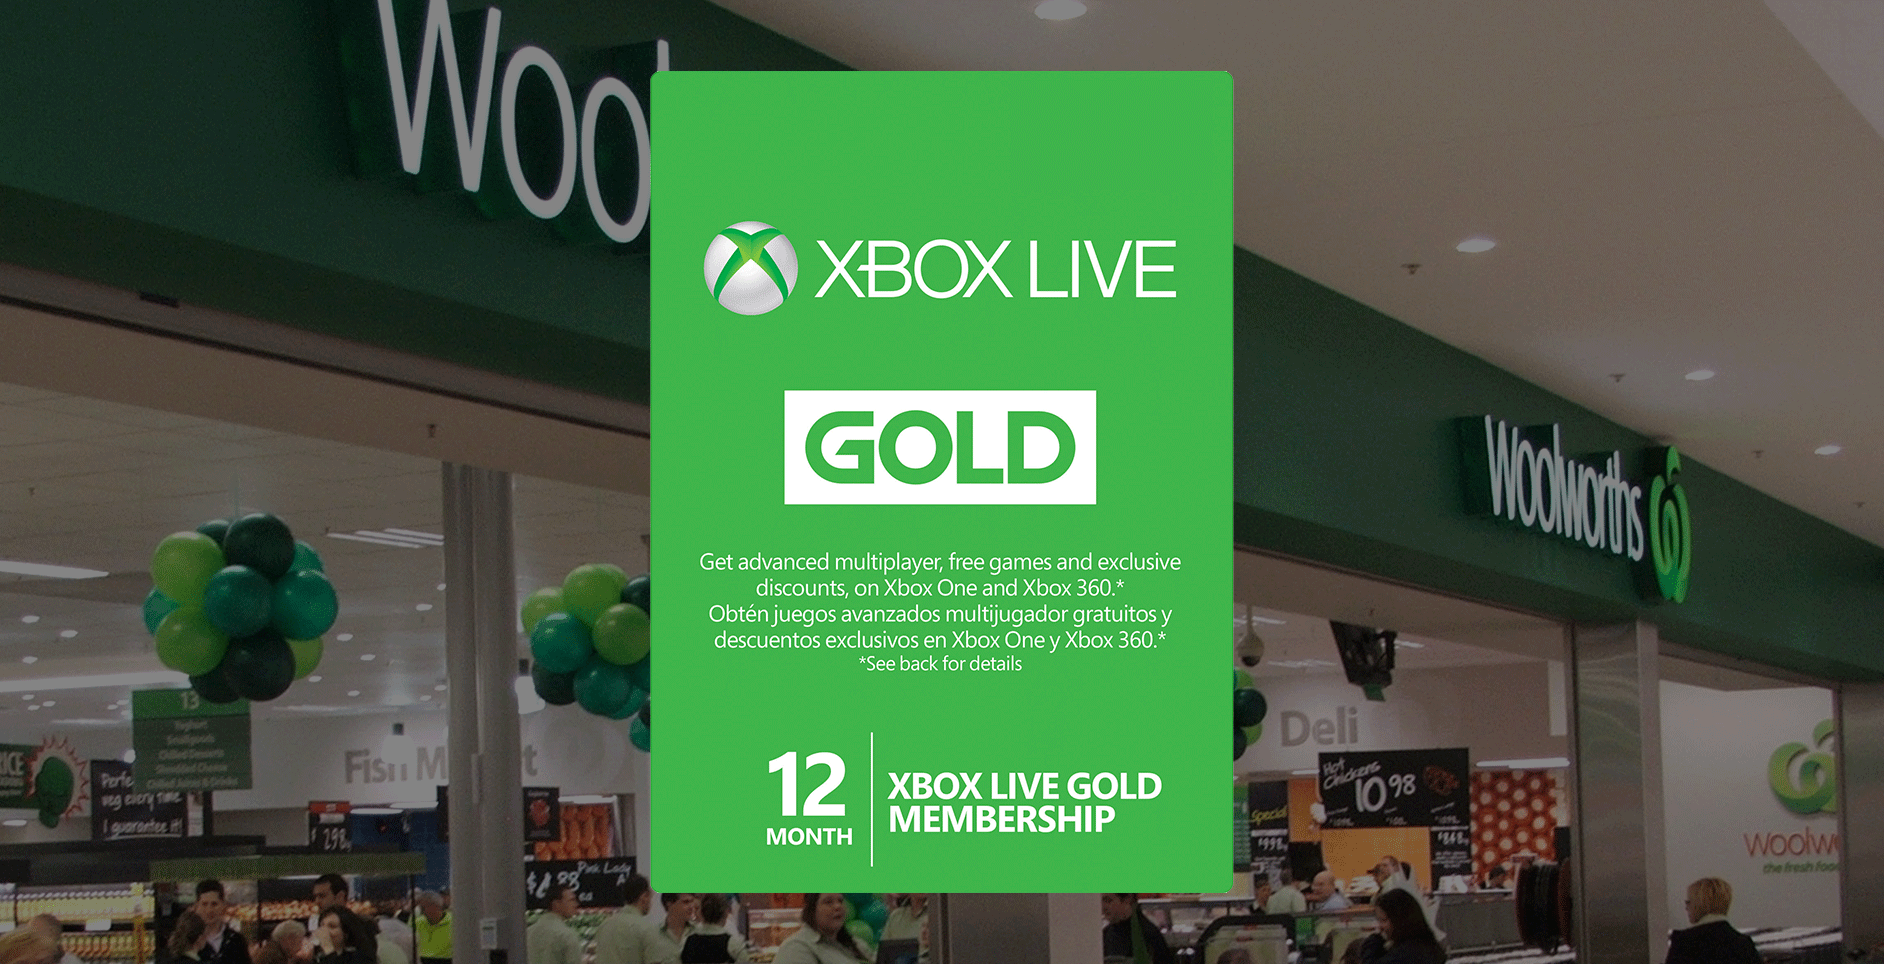 xbox live gold 12 months woolworths